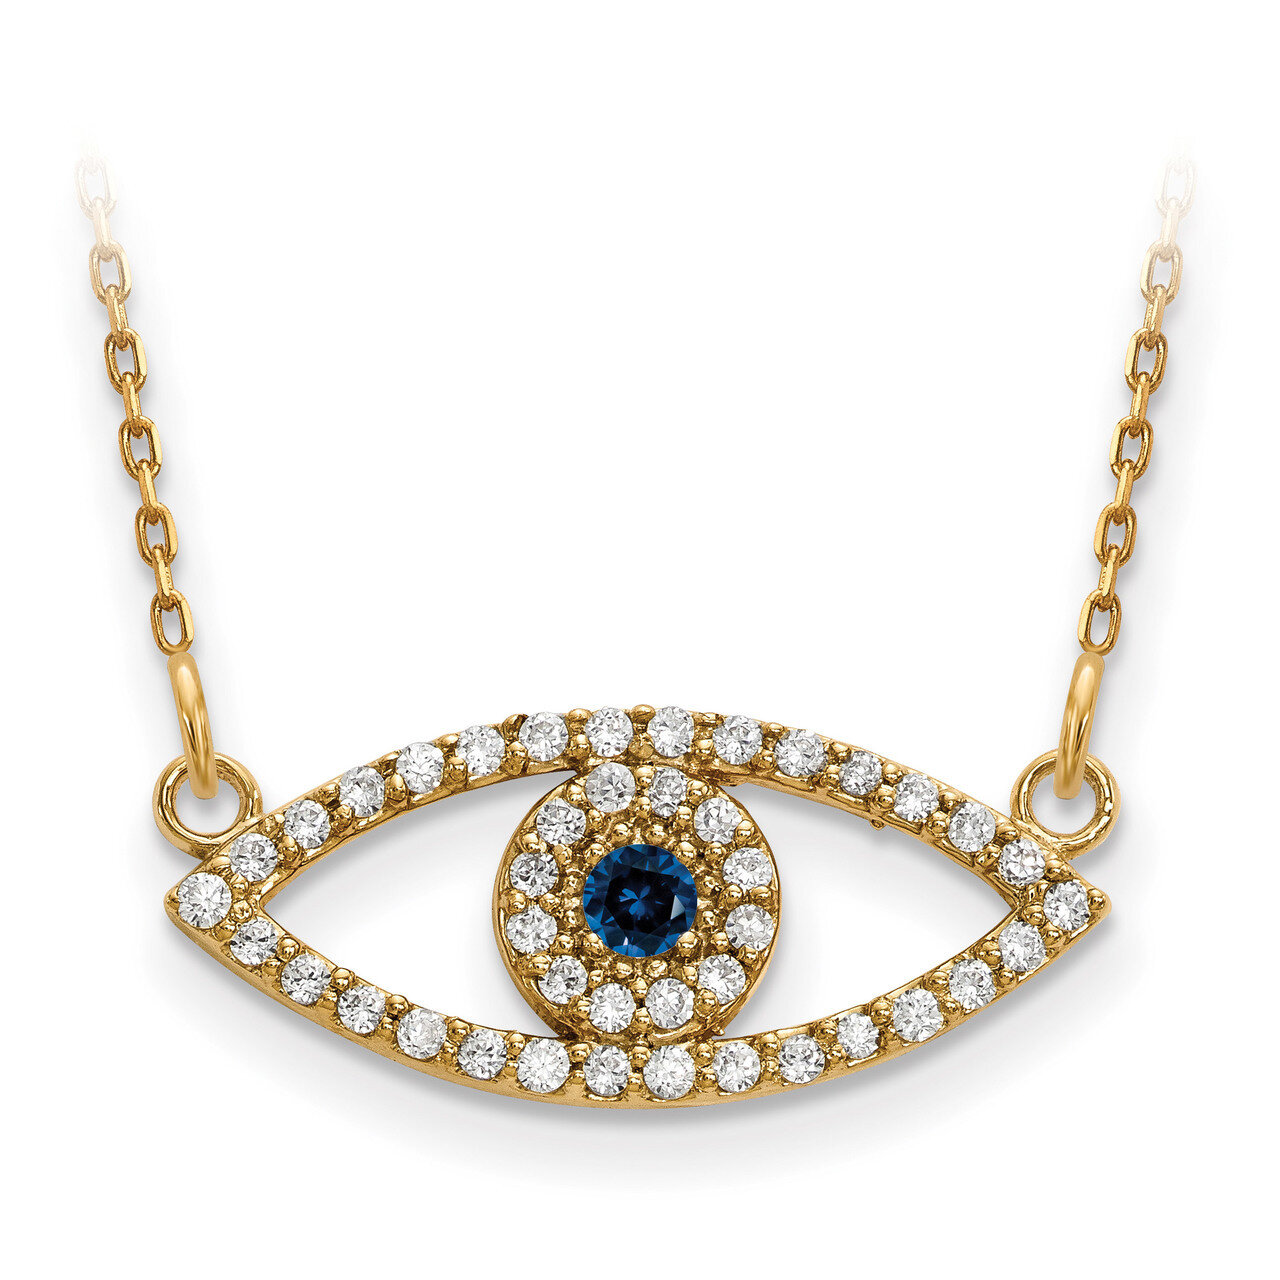 Small Diamond and Sapphire Evil Eye Necklace 14k Gold XP5044S/A